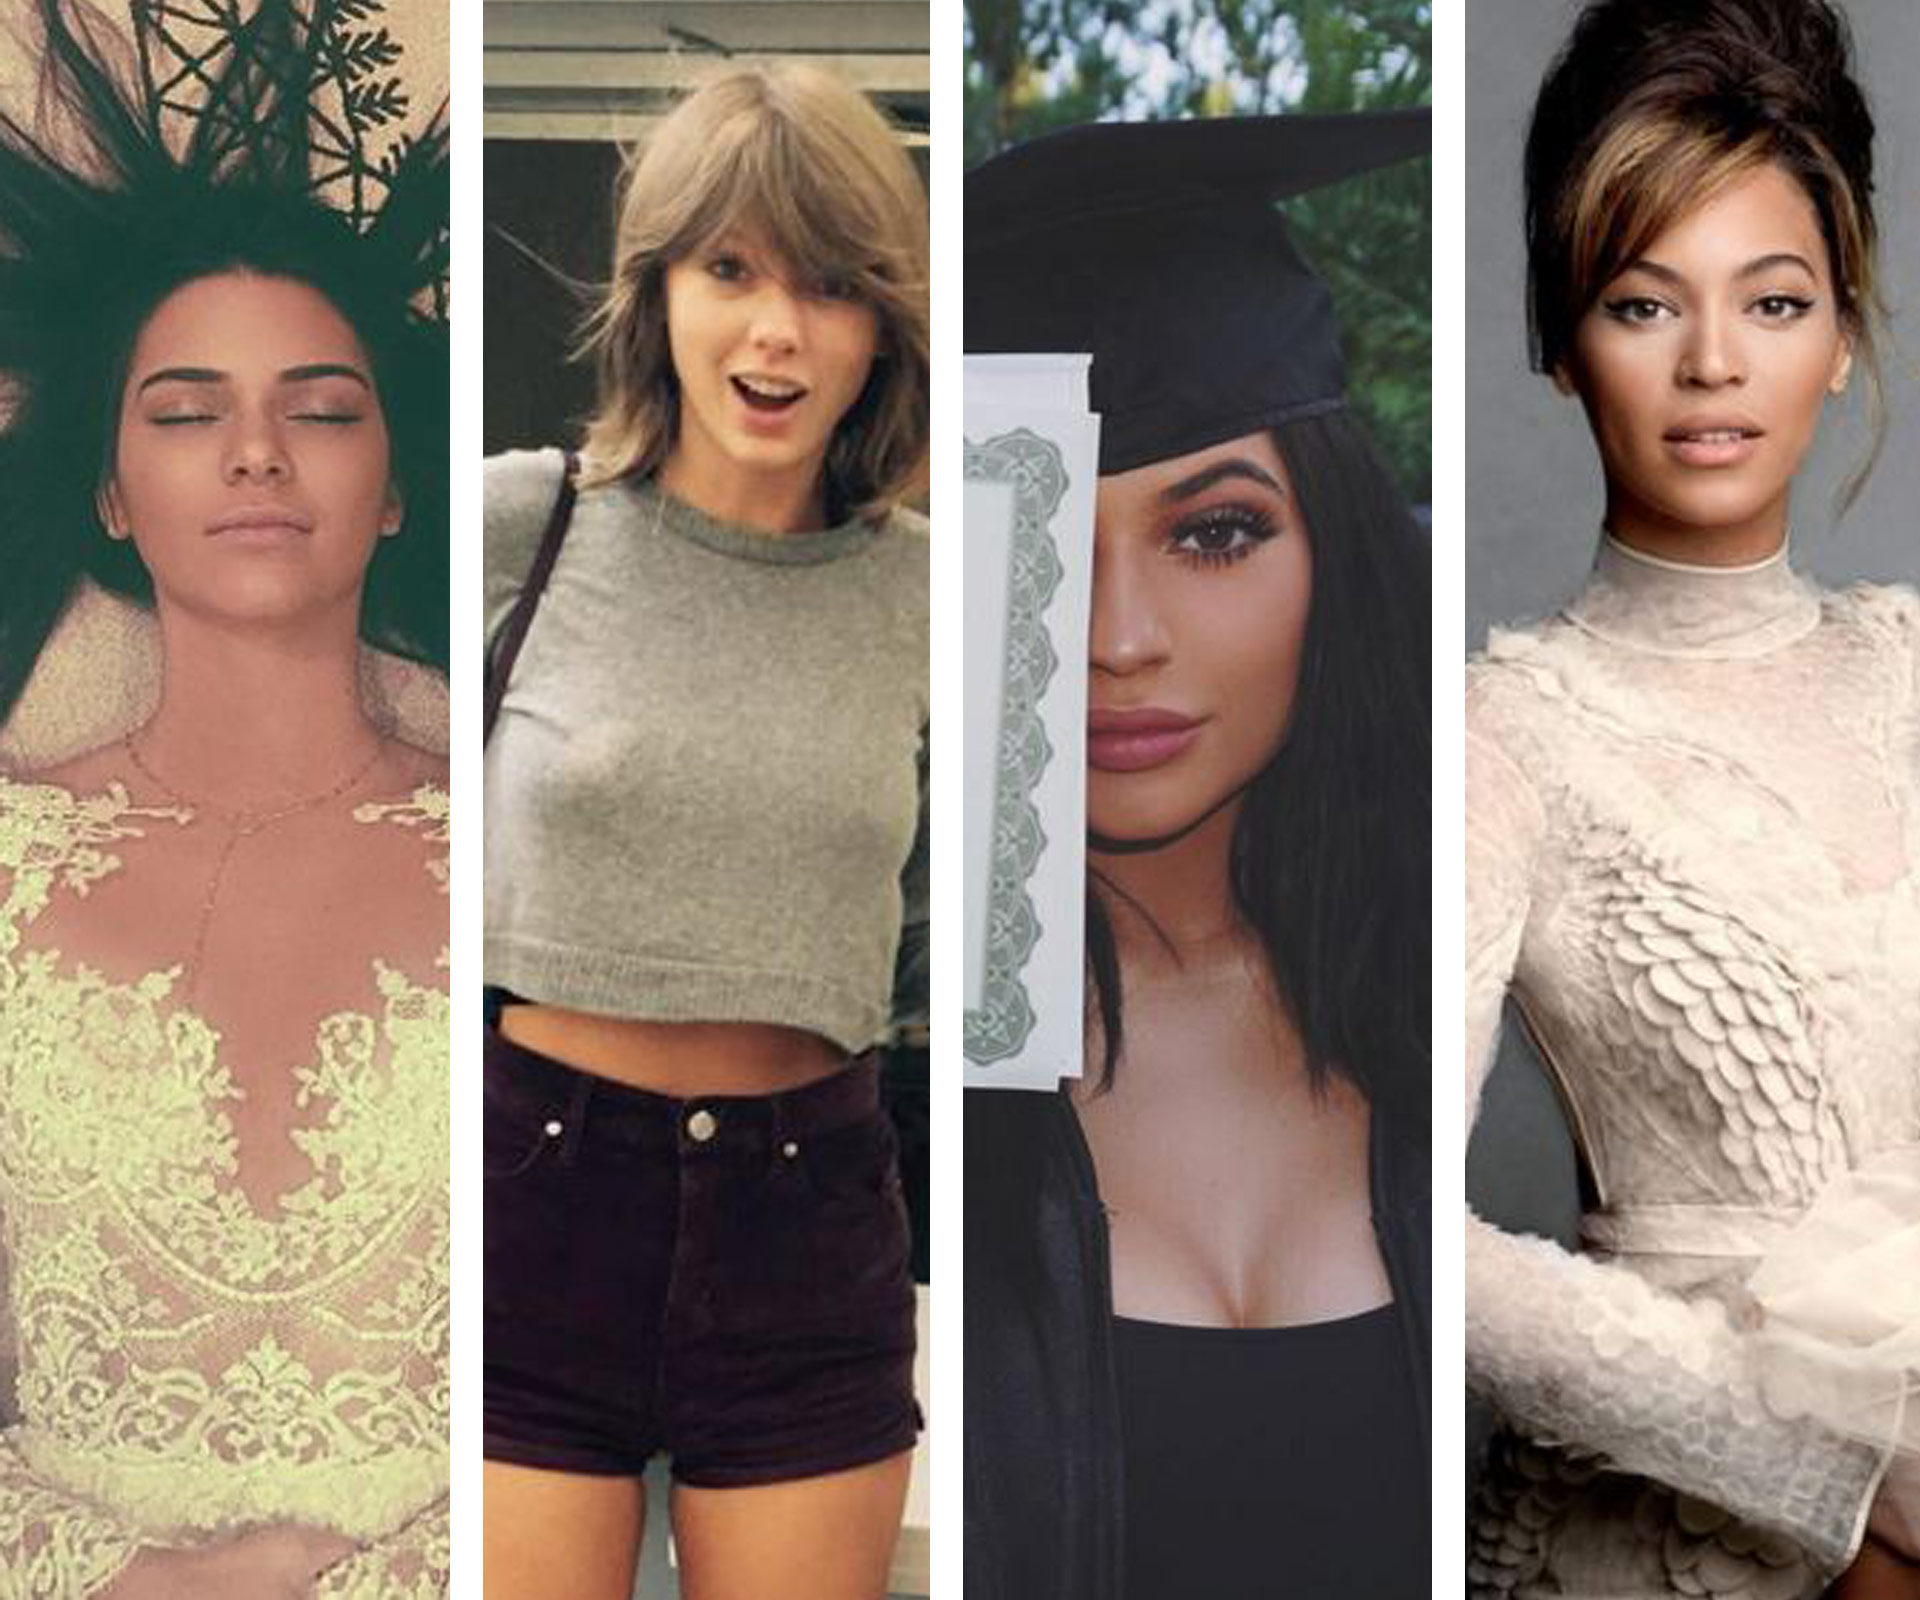 Instagram's top 10 most-liked photos of 2015